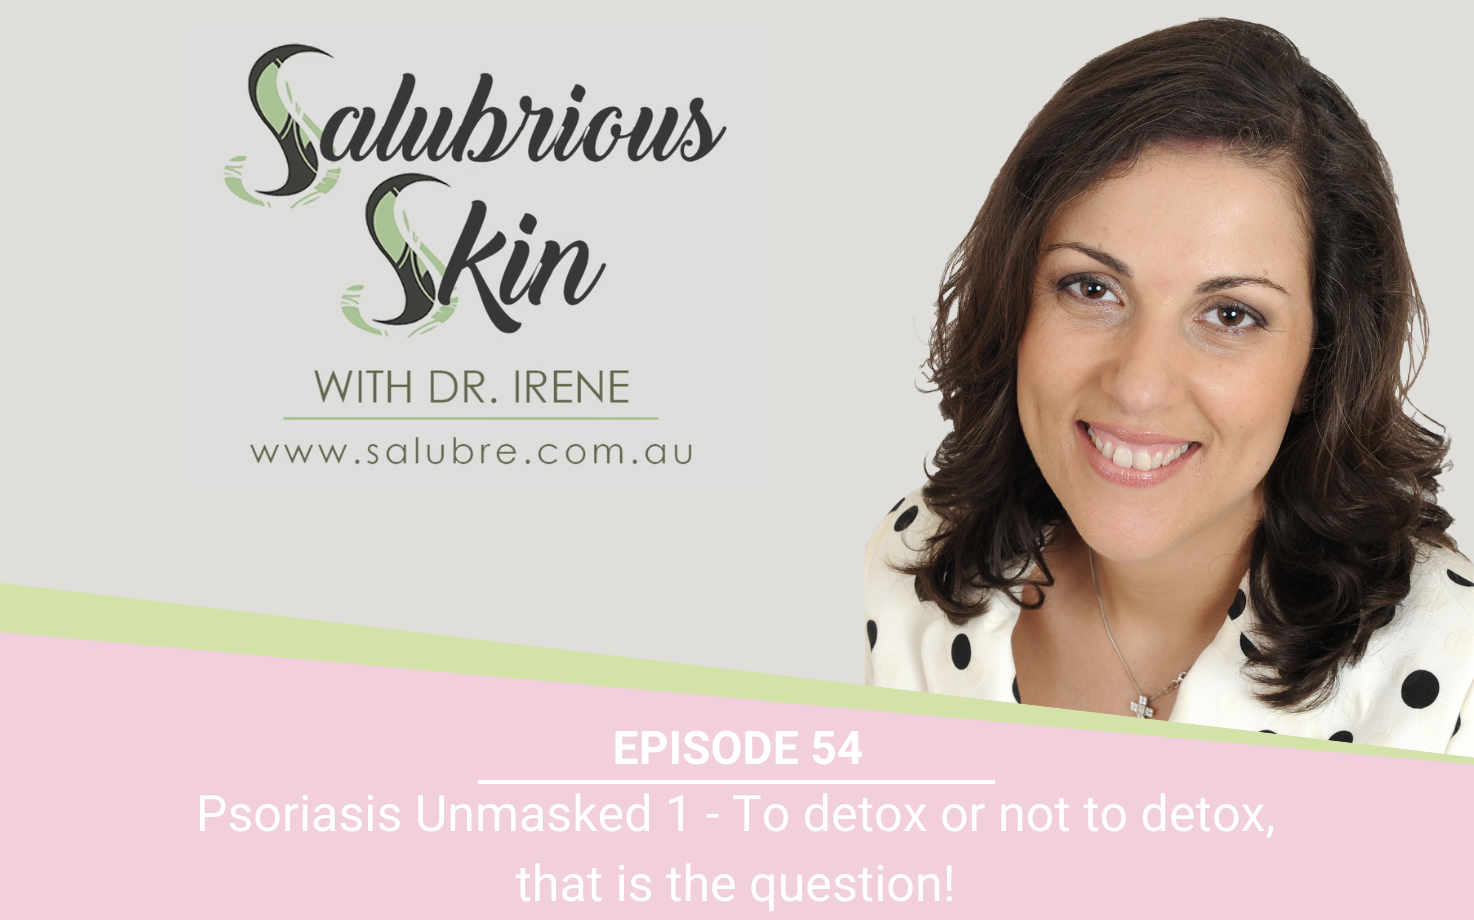 Podcast 54: Psoriasis Unmasked 1 - To Detox or Not to Detox, That is The Question!